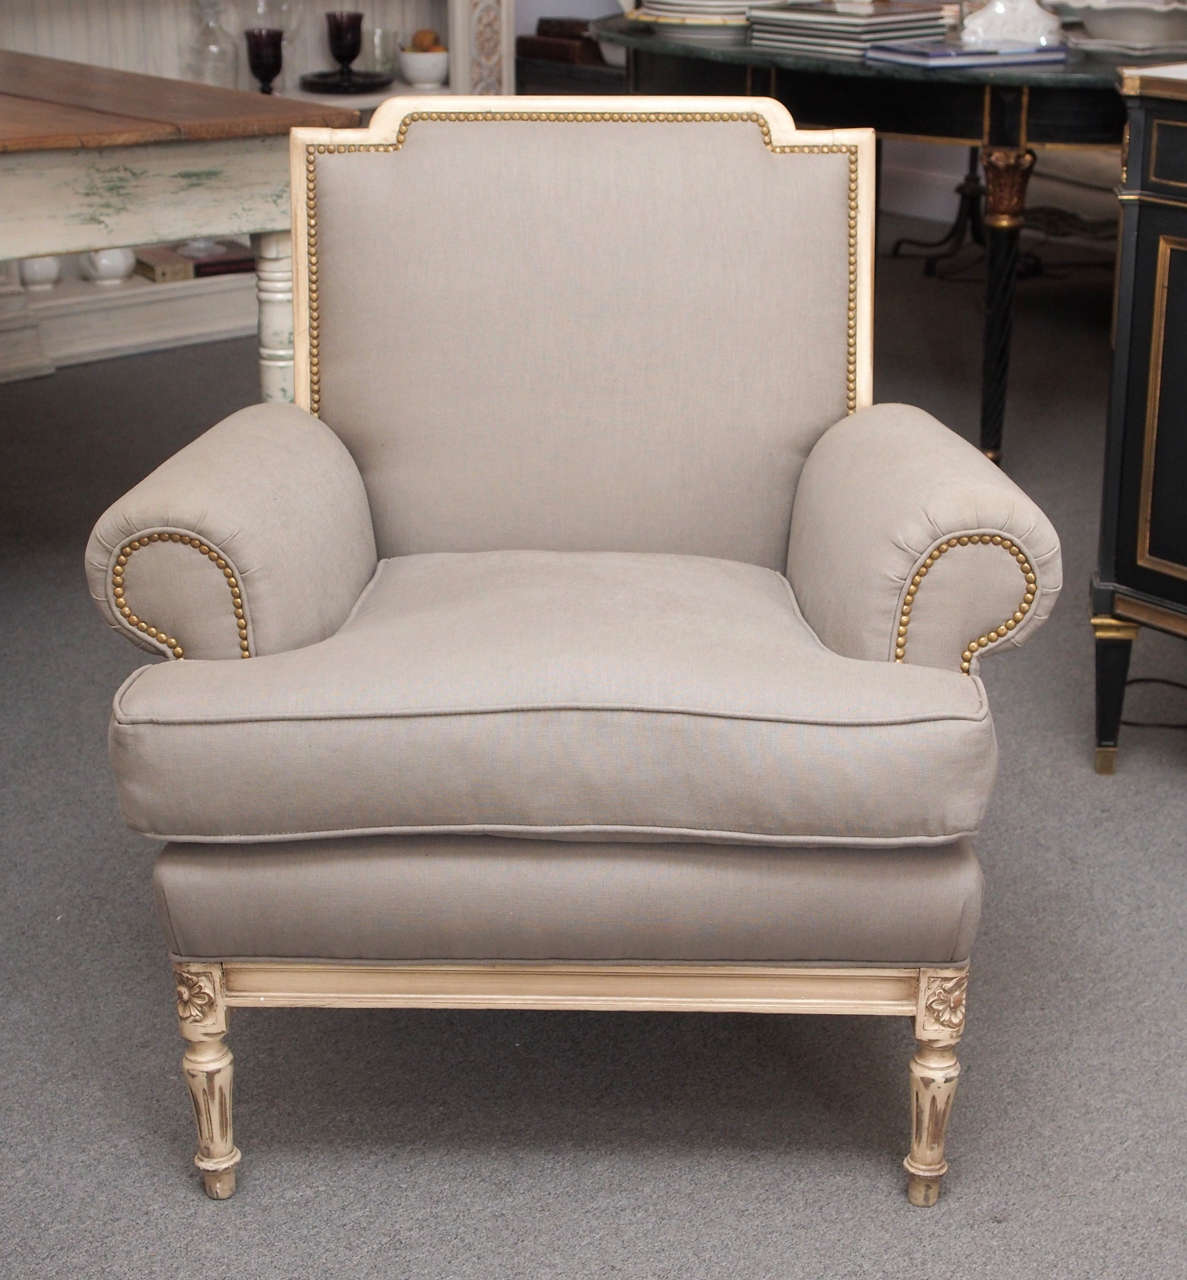 Pair of armchairs with rolled arms and a removable seat cushion, upholstered in gray fabric with nailheads. Fluted legs ending in toupie feet support the cream color painted wood frame having rails ornamented with floral carved corner blocks,